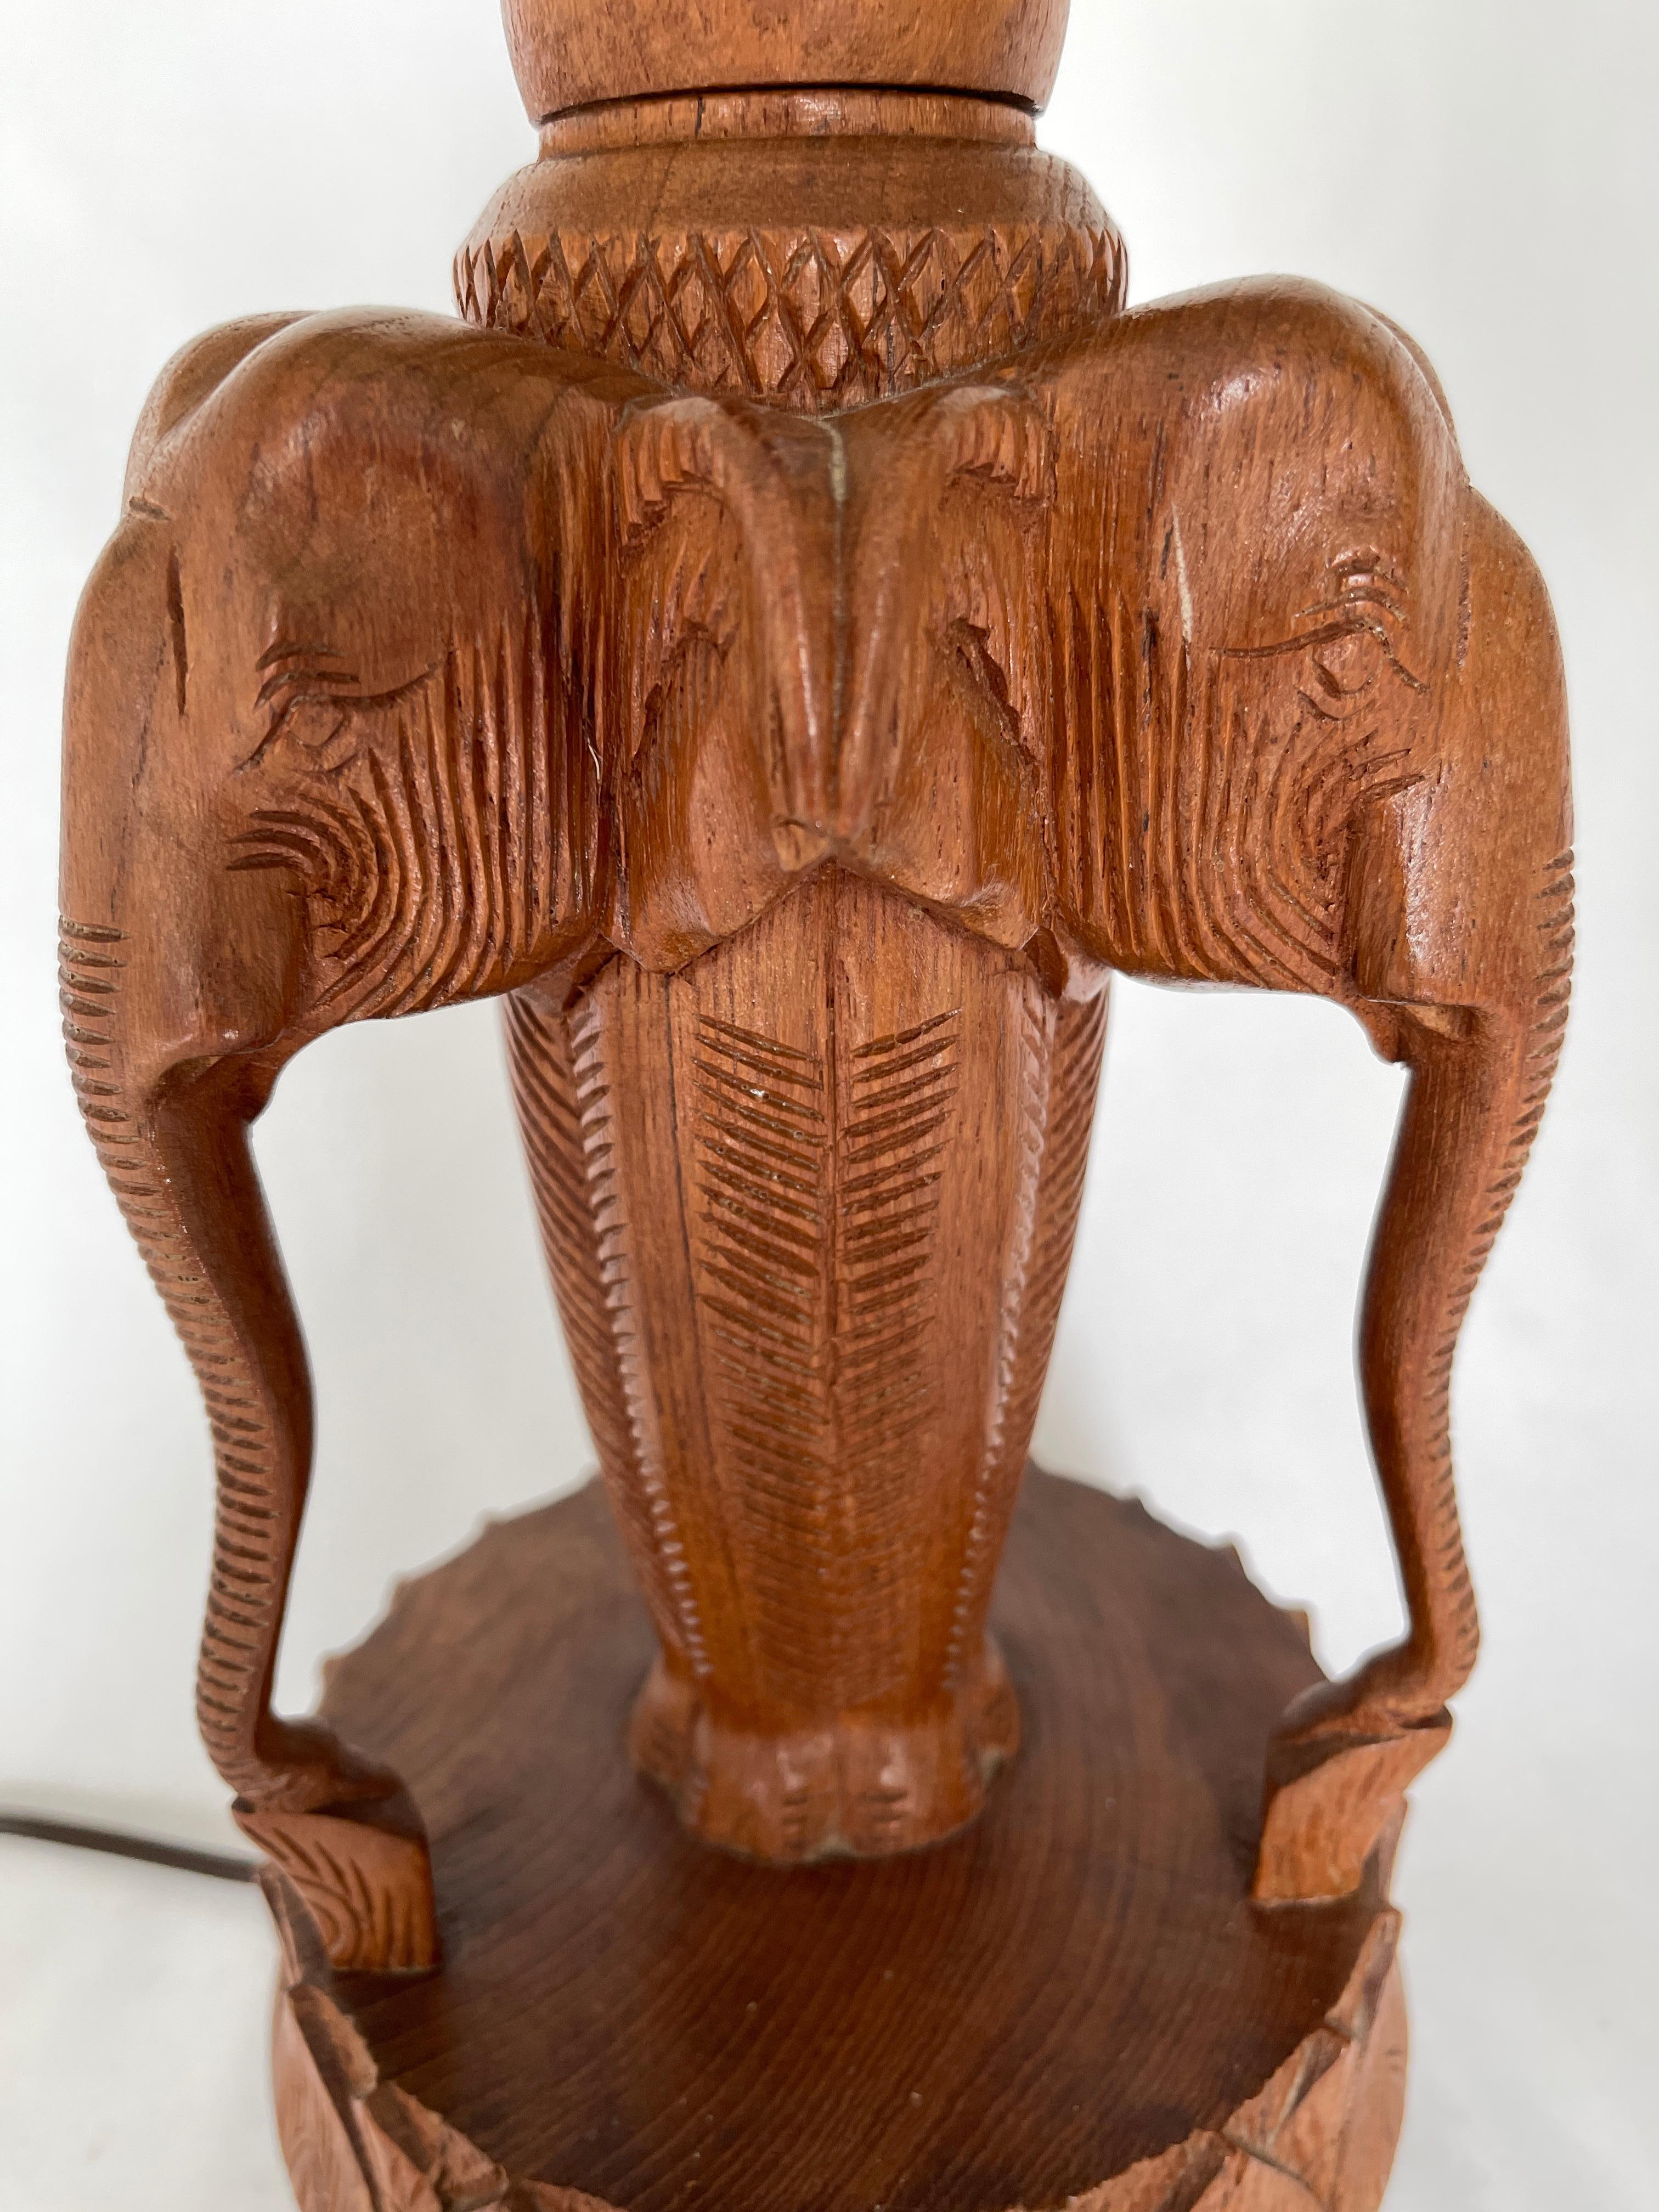 1970's Indian Carved Teak Wood Elephant Sculpture Lamp w/ Haitian Cotton Shade For Sale 5